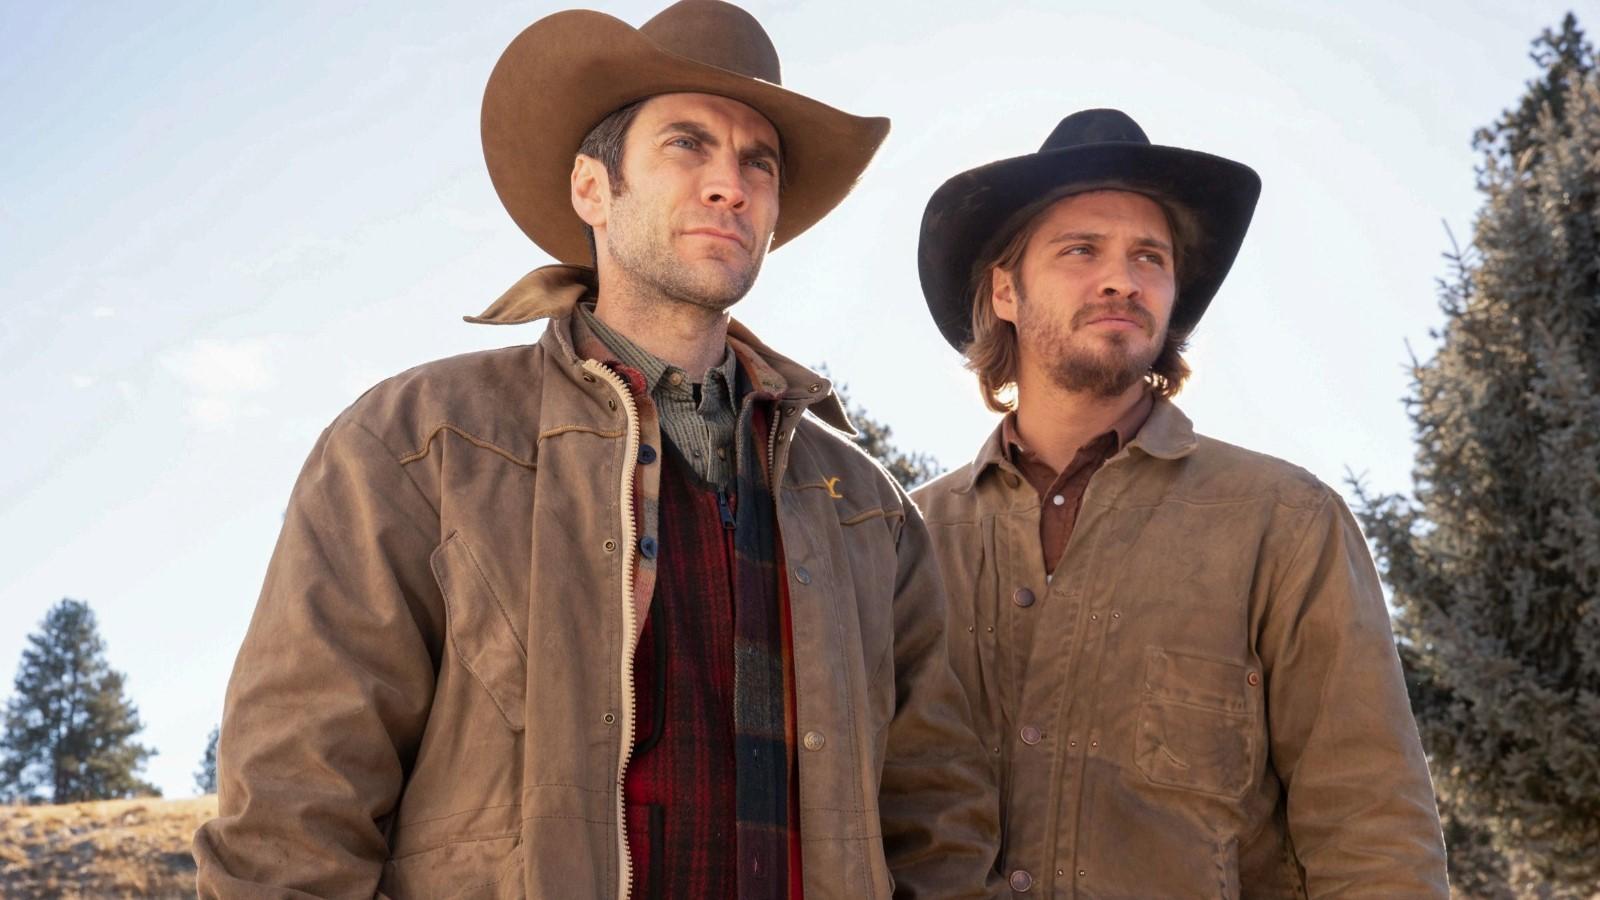 Wes Bentley as Jamie Dutton and Luke Grimes as Kayce Dutton in Yellowstone